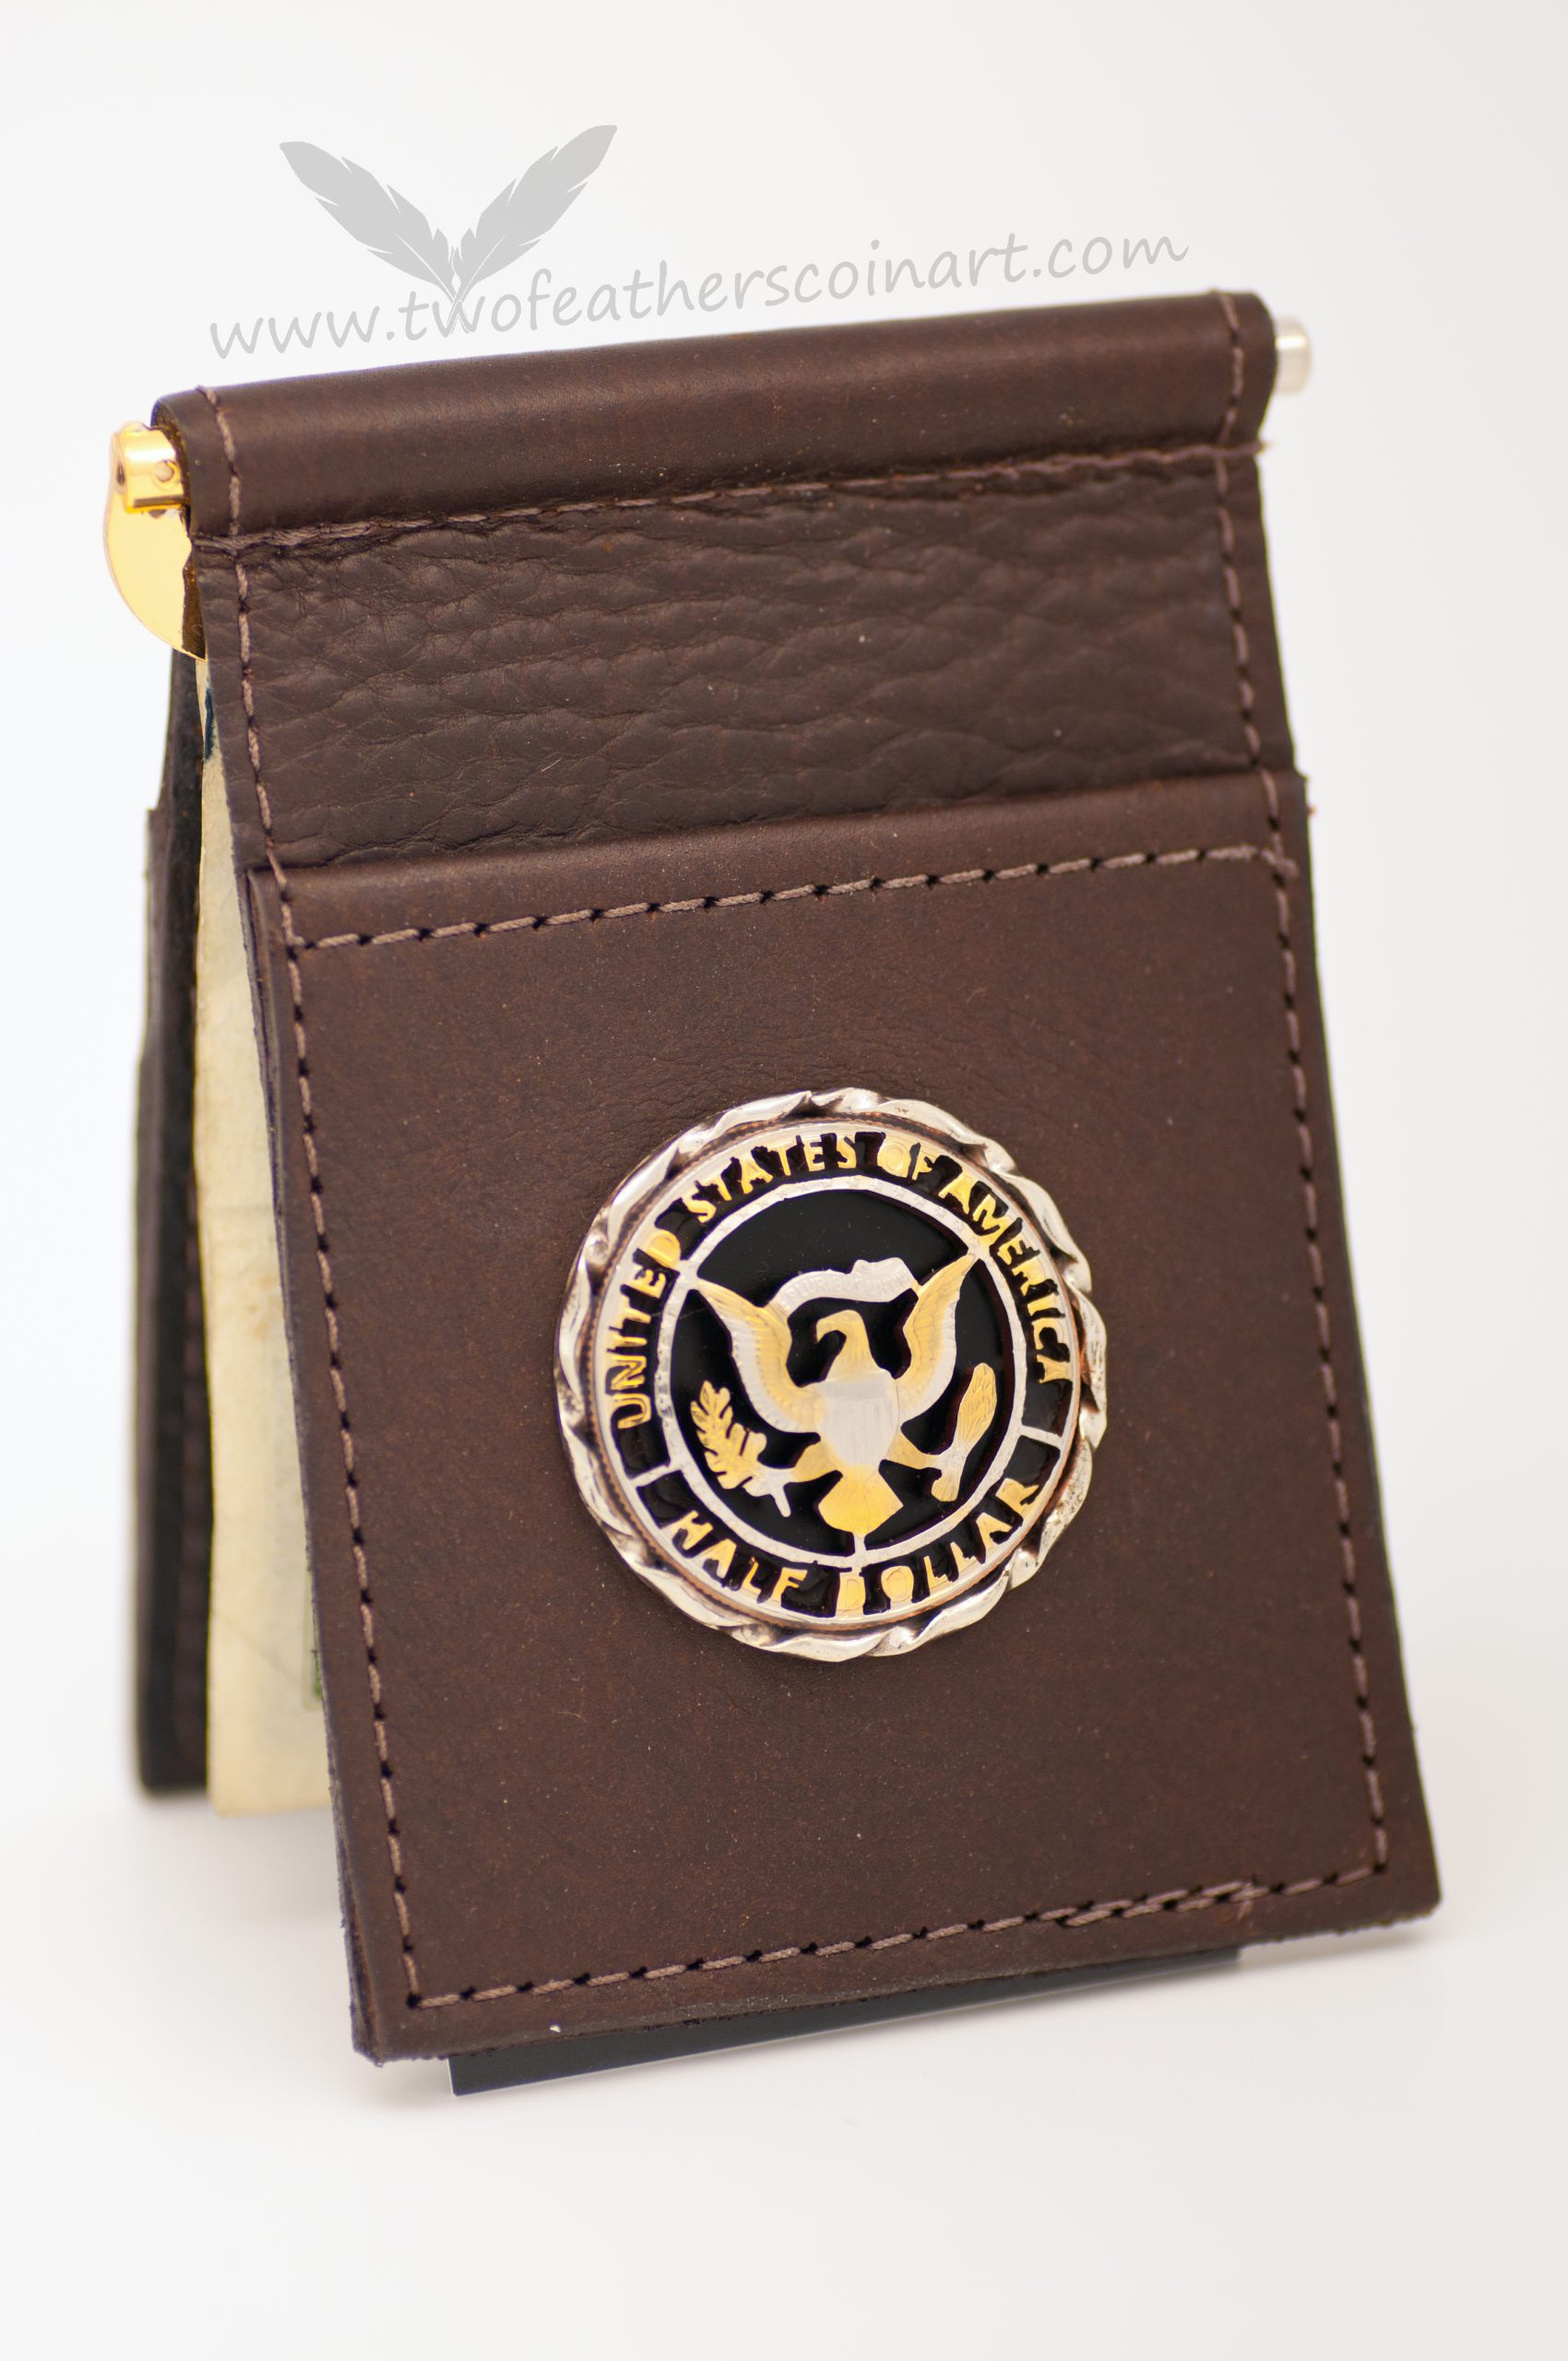 Buffalo Leather Money Clip/Card Holder by Two Feathers Coin Art